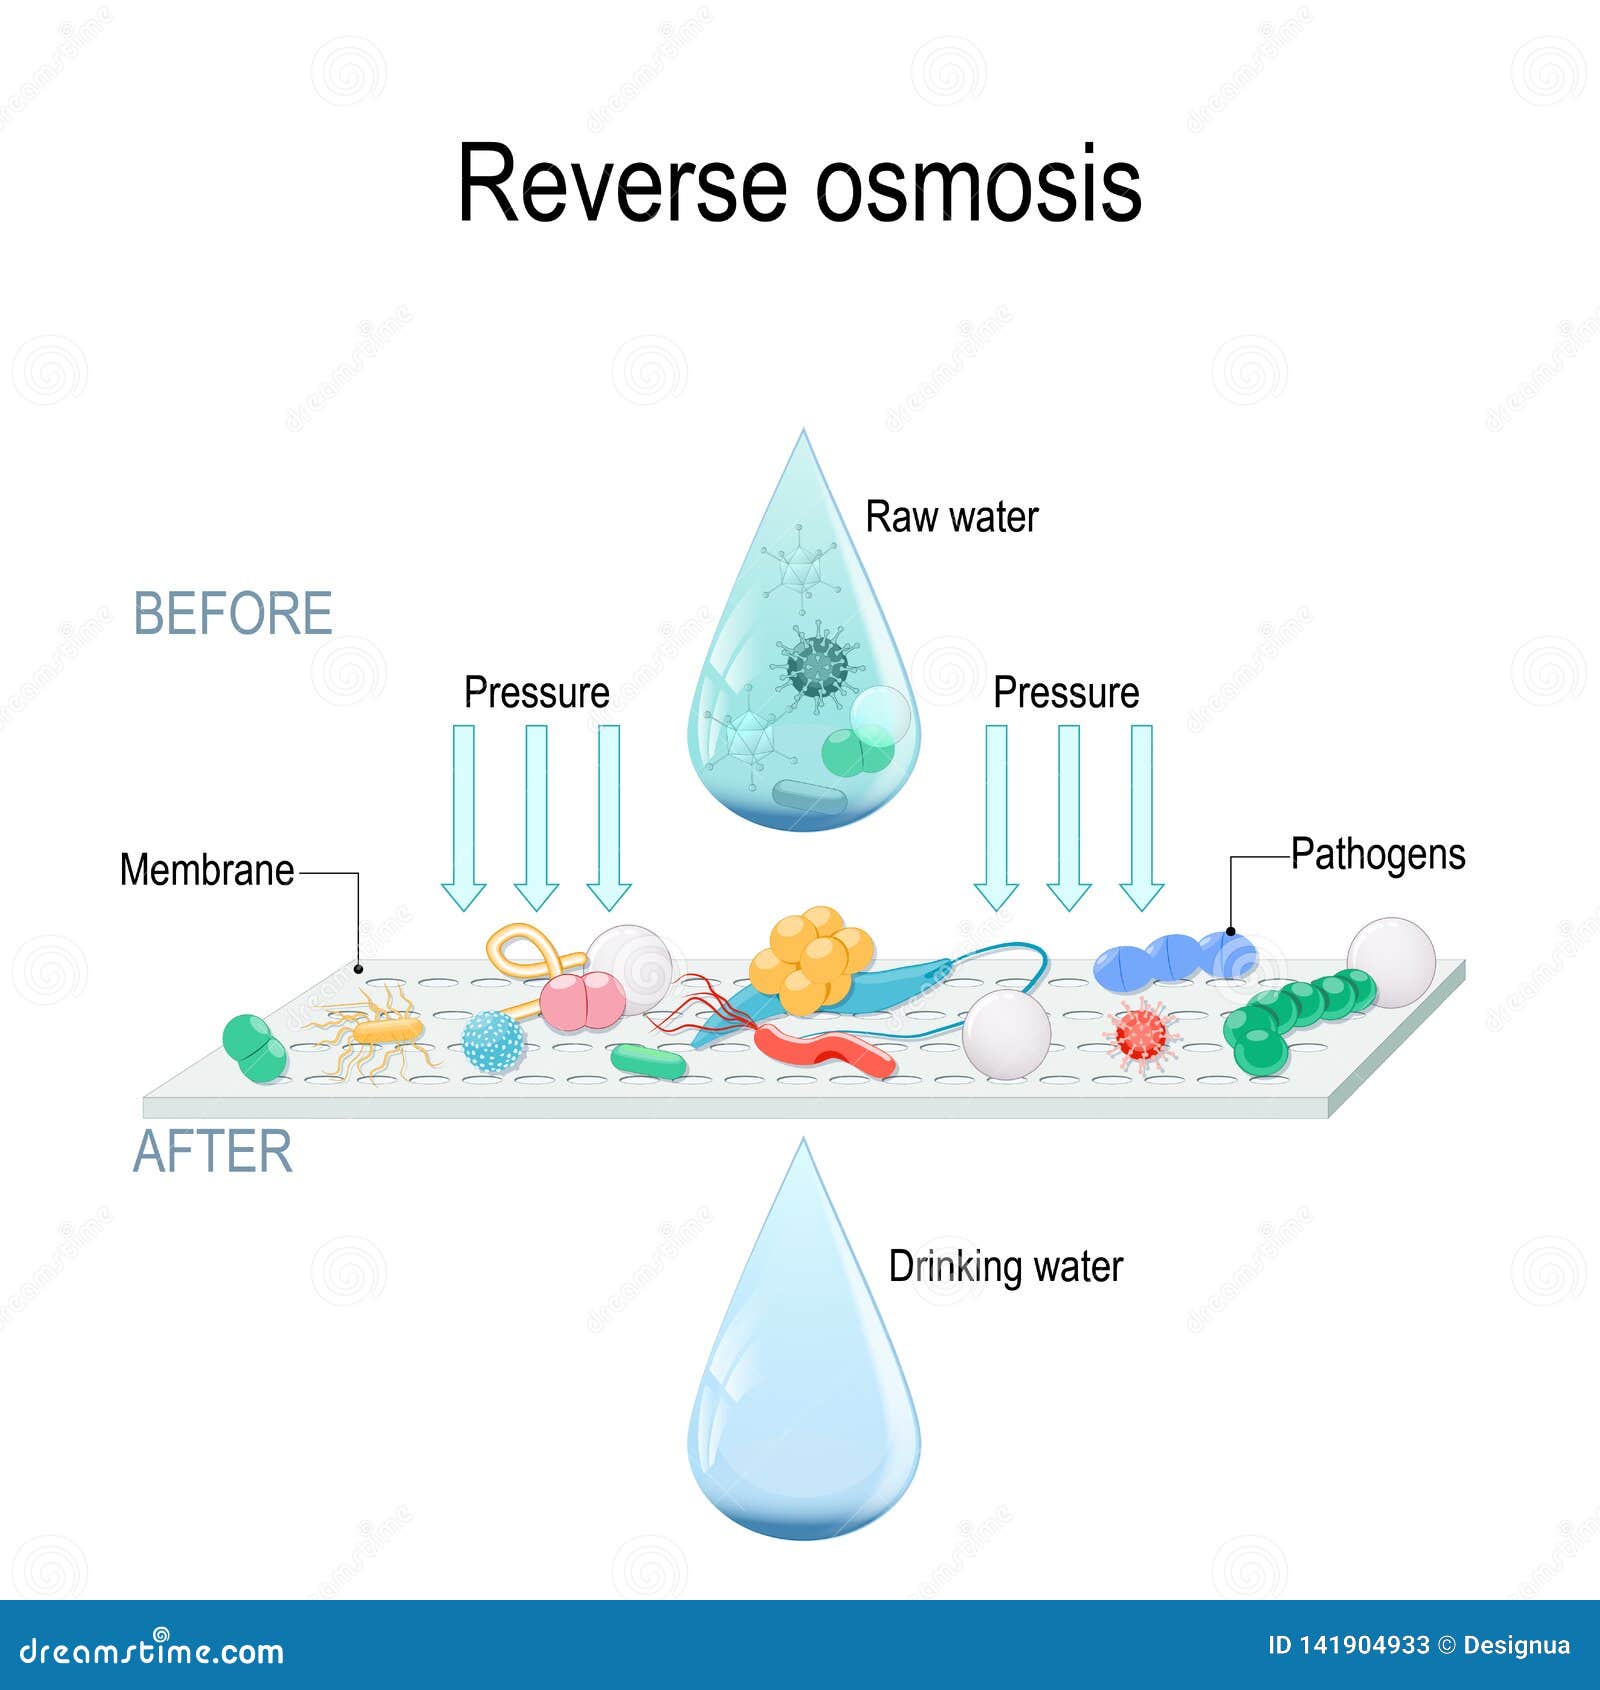 reverse osmosis use the membrane to act like an extremely fine filter to create drinking water from contaminated water.